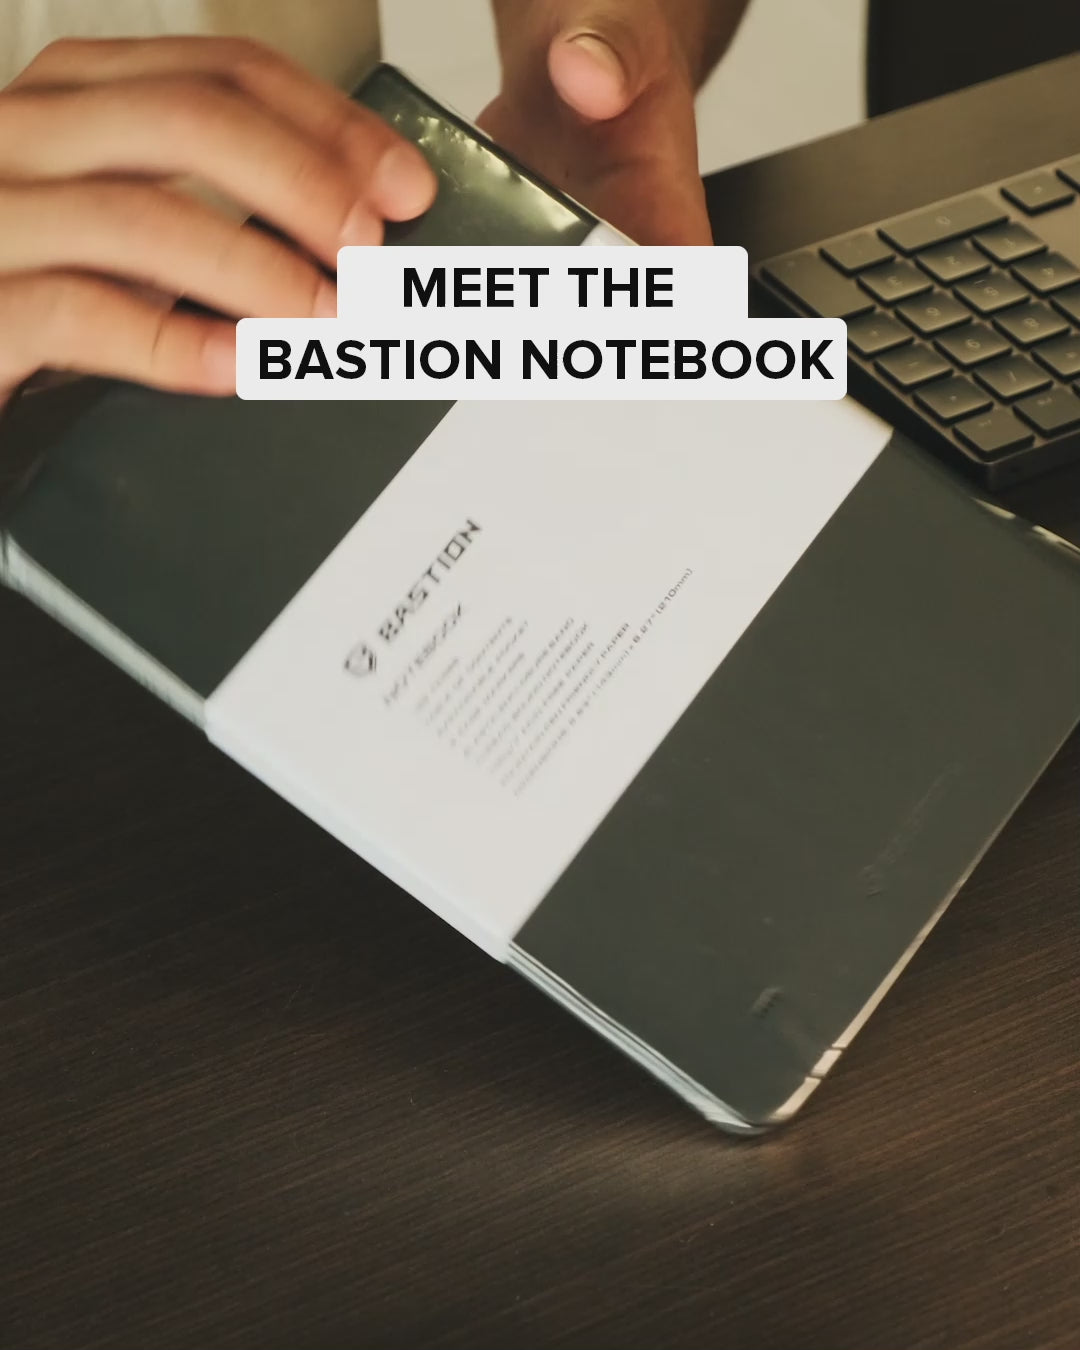 Classic Hardcover Notebook by Bastion®